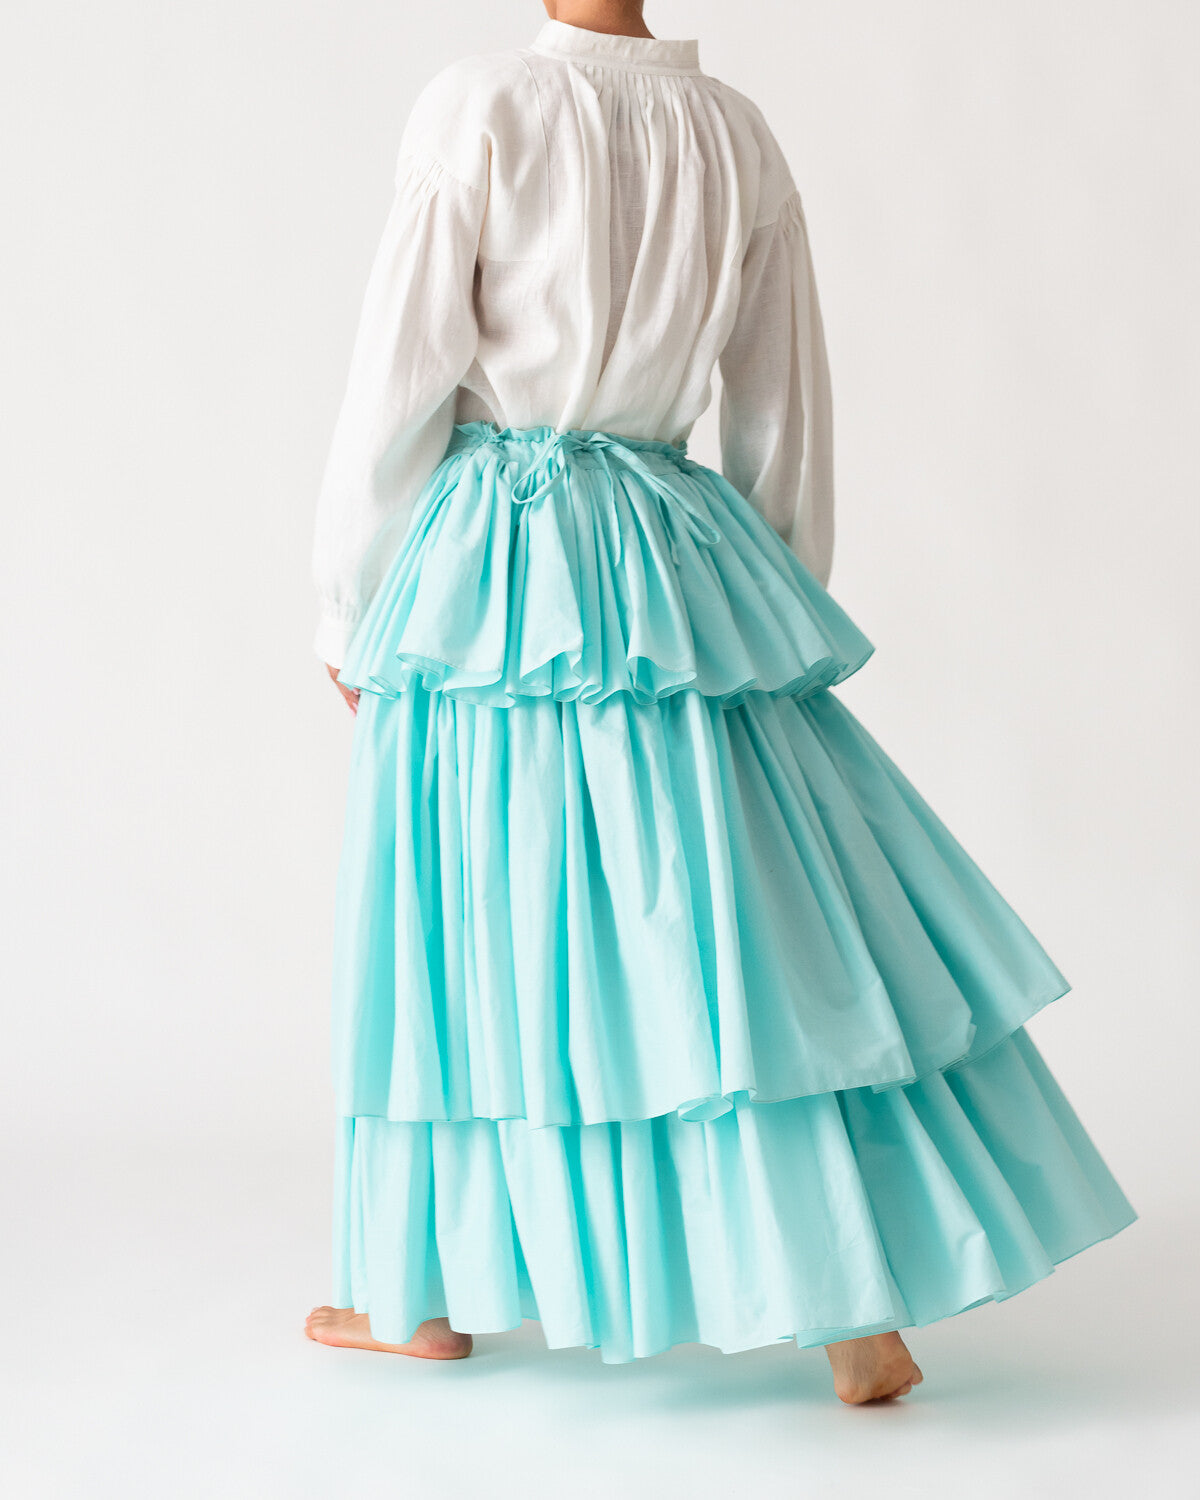 Puffy Skirt Turquoise